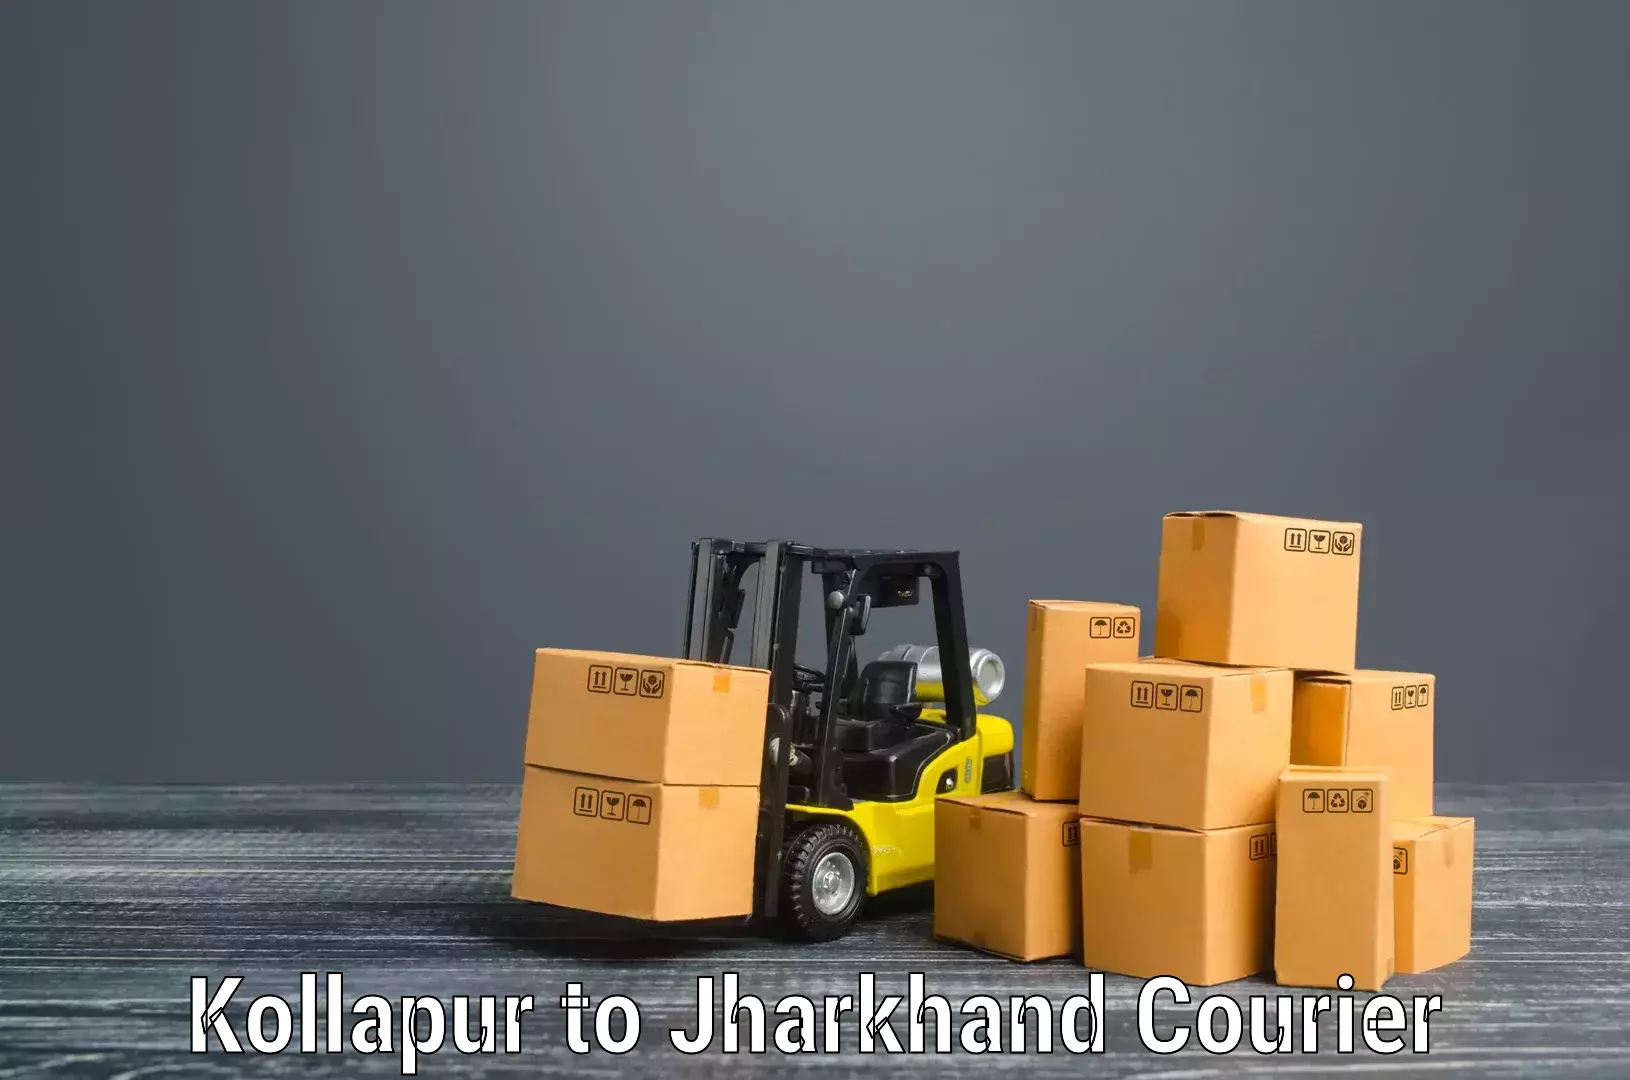 Budget-friendly moving services Kollapur to Hazaribagh